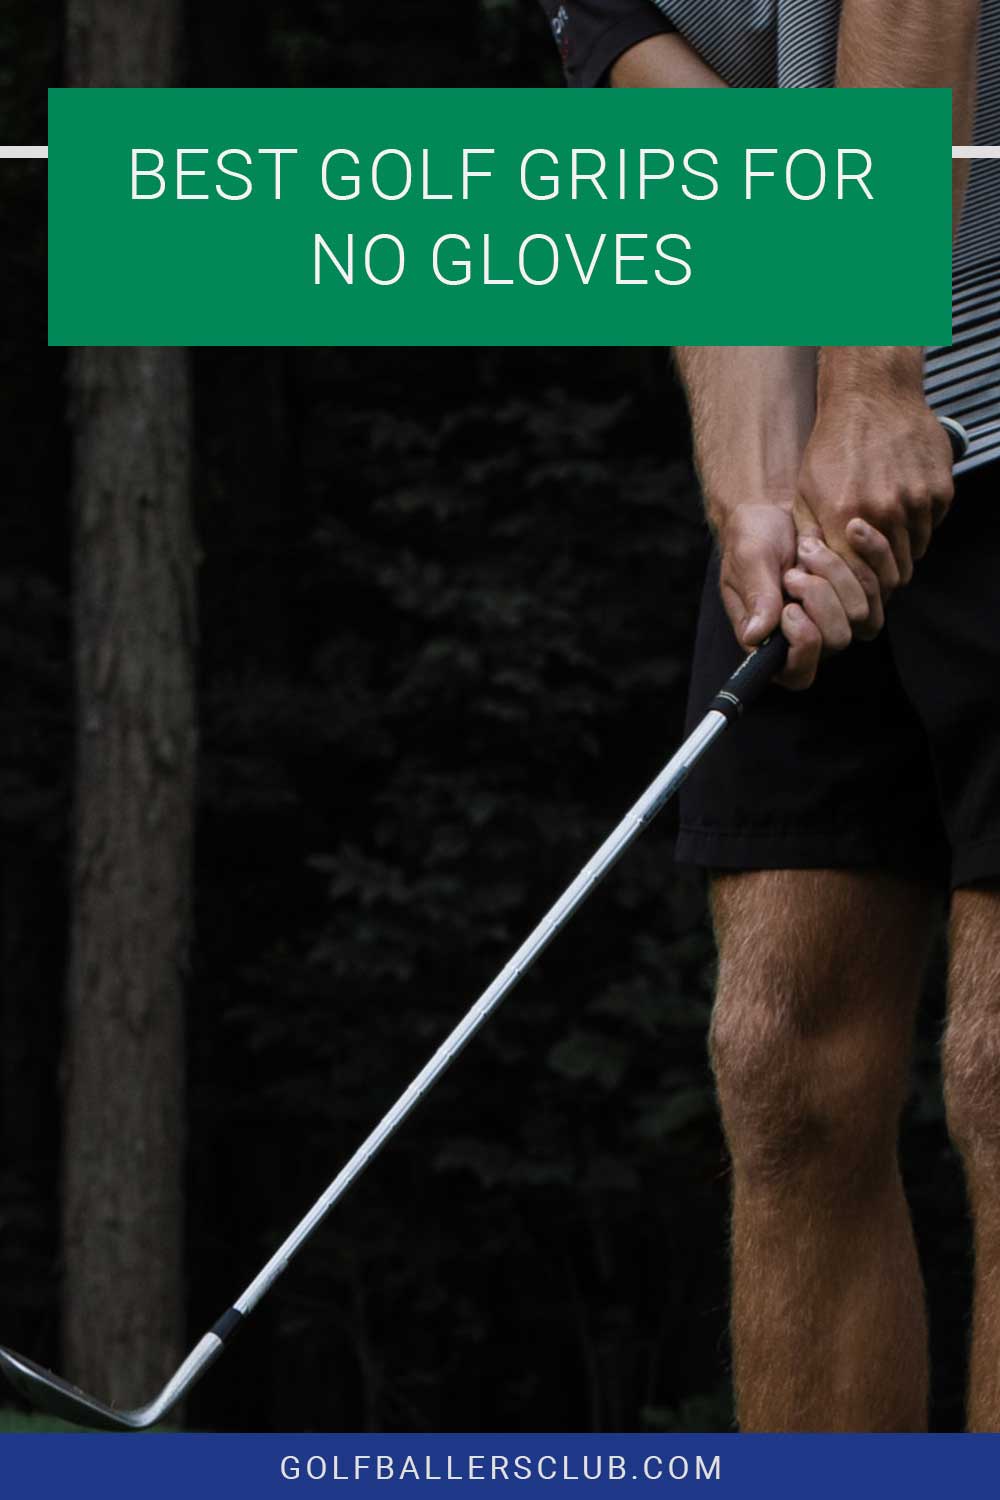 Man wearing black shorts holding a golf iron - Best Golf Grips for No Gloves.